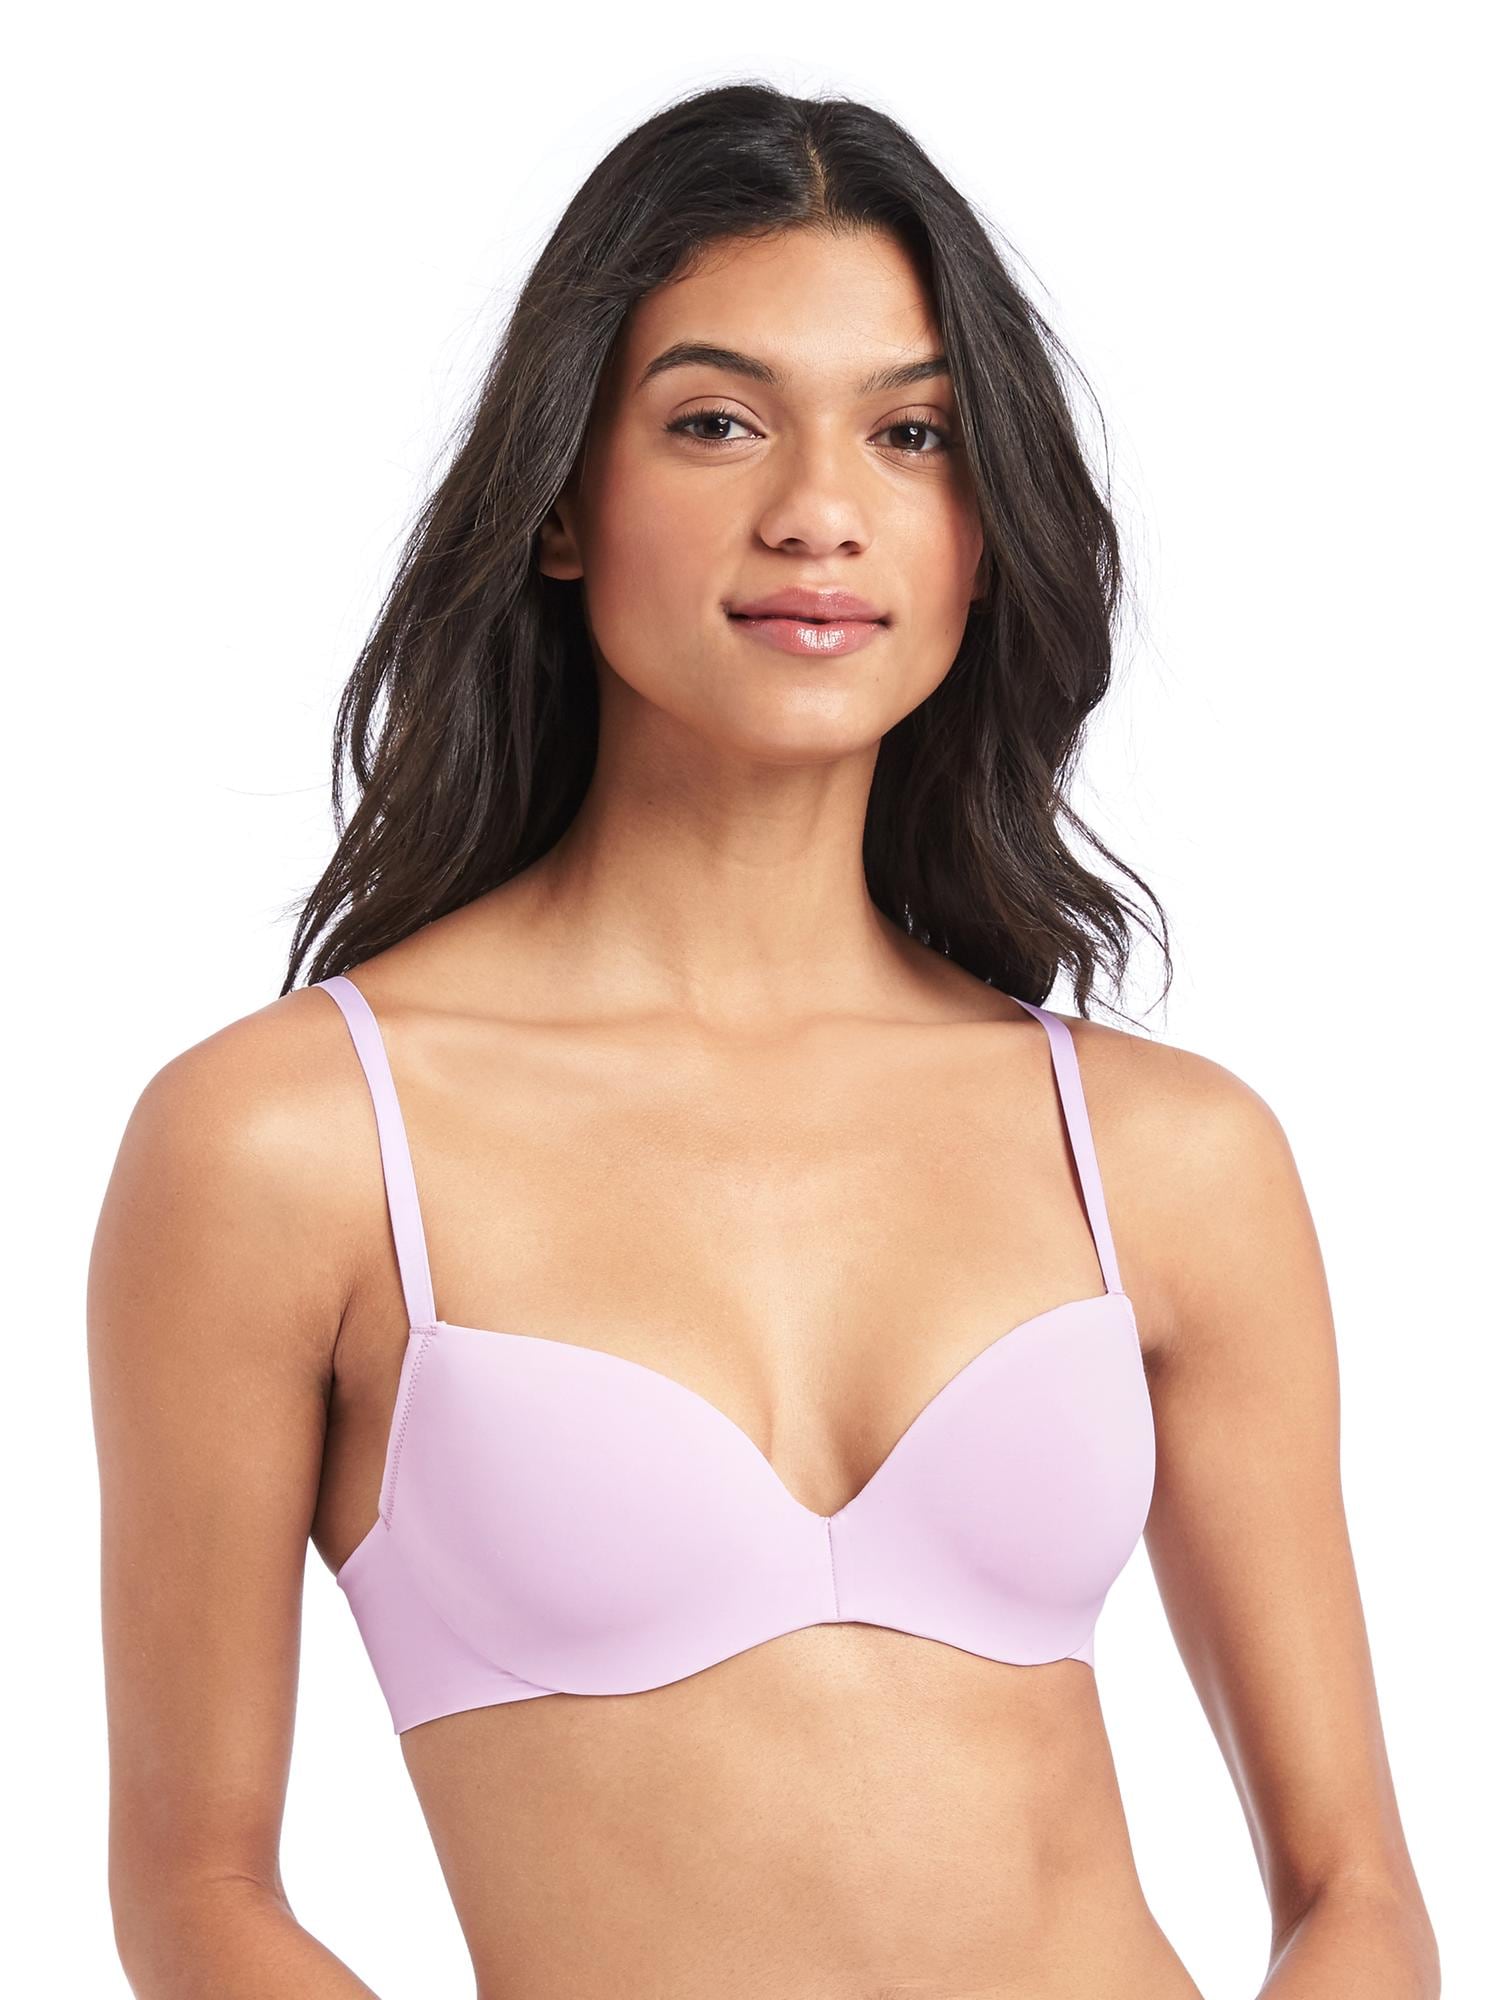 gap, underwire cuts, gore keeps riding up 30D - Passionata